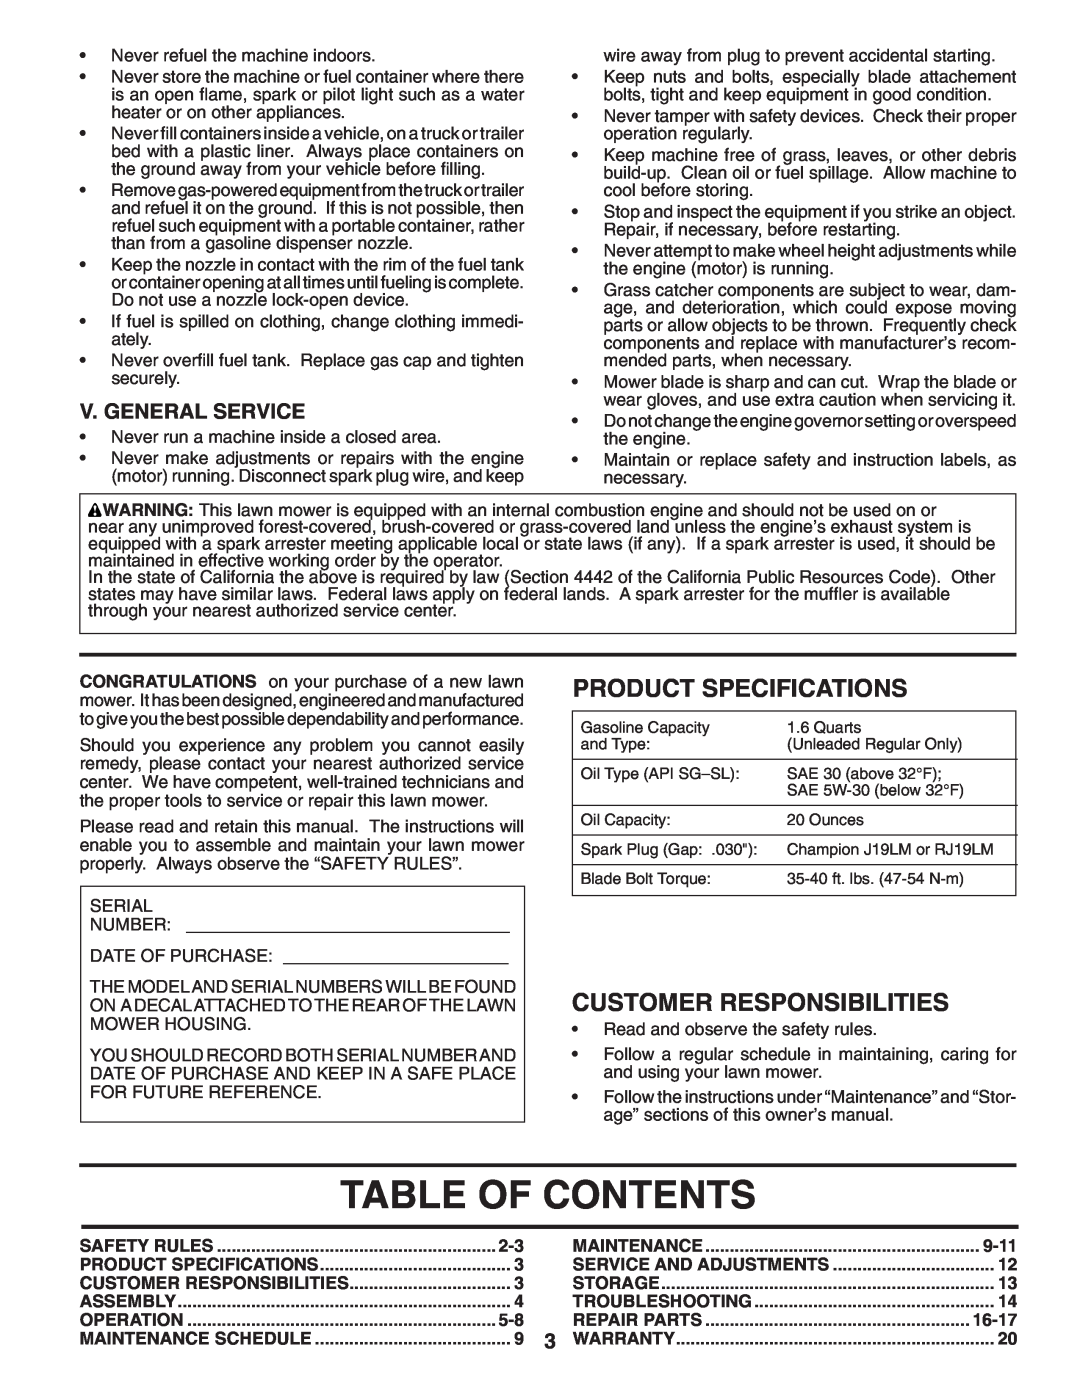 Husqvarna 6521CM owner manual Table Of Contents, Product Specifications, Customer Responsibilities, V. General Service 